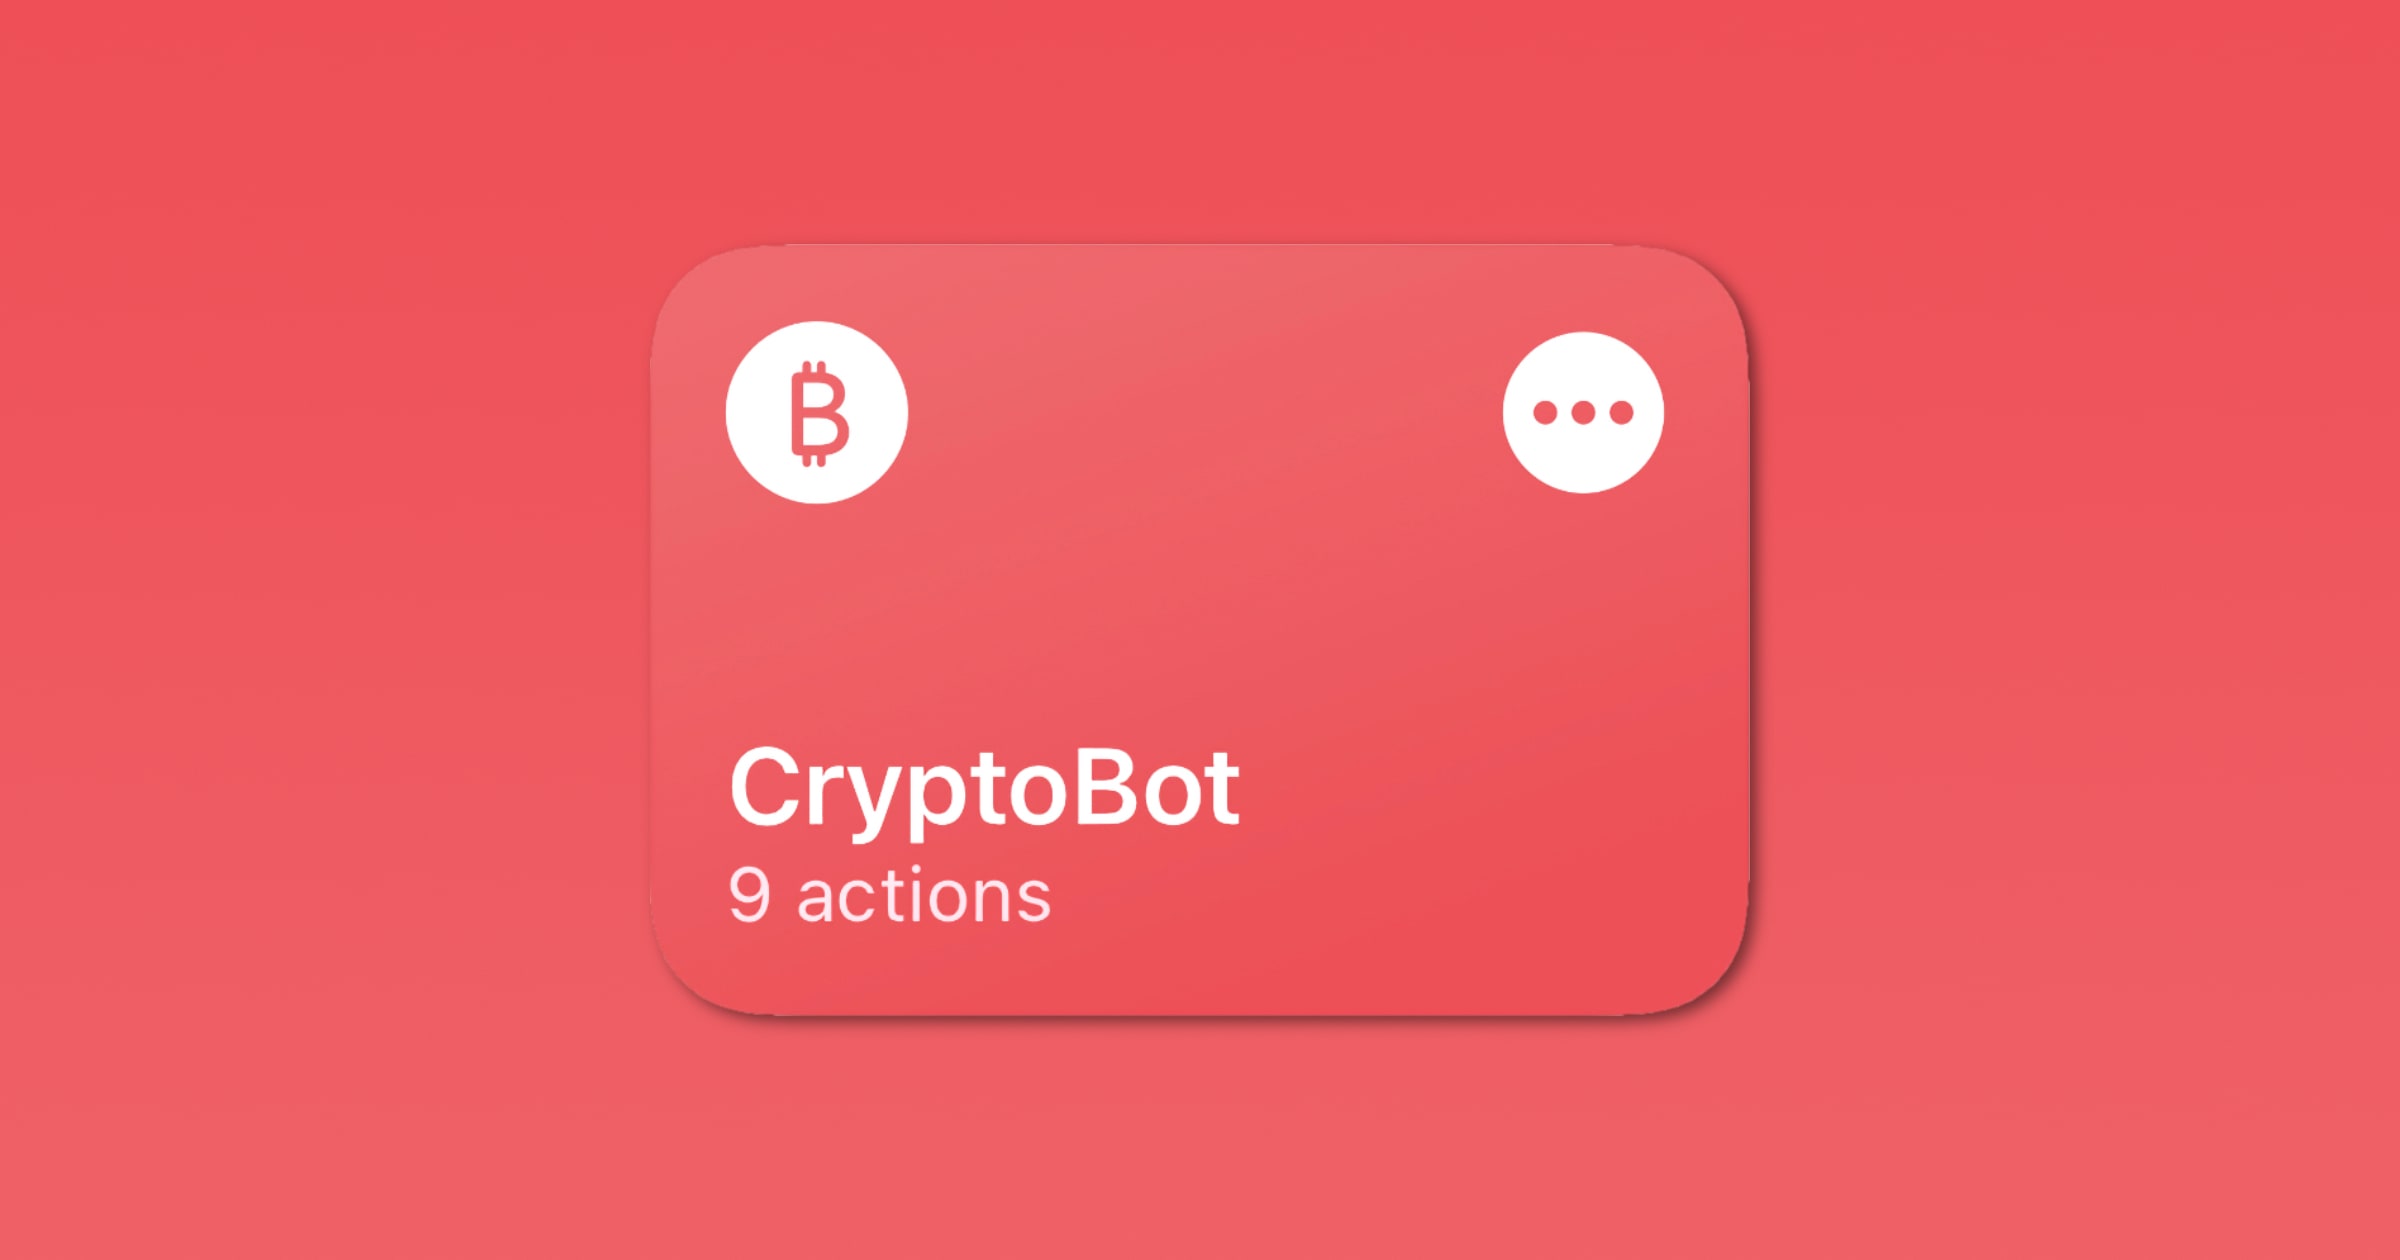 Let The ‘CryptoBot’ Shortcut Decide Which Cryptocurrency You Should Buy